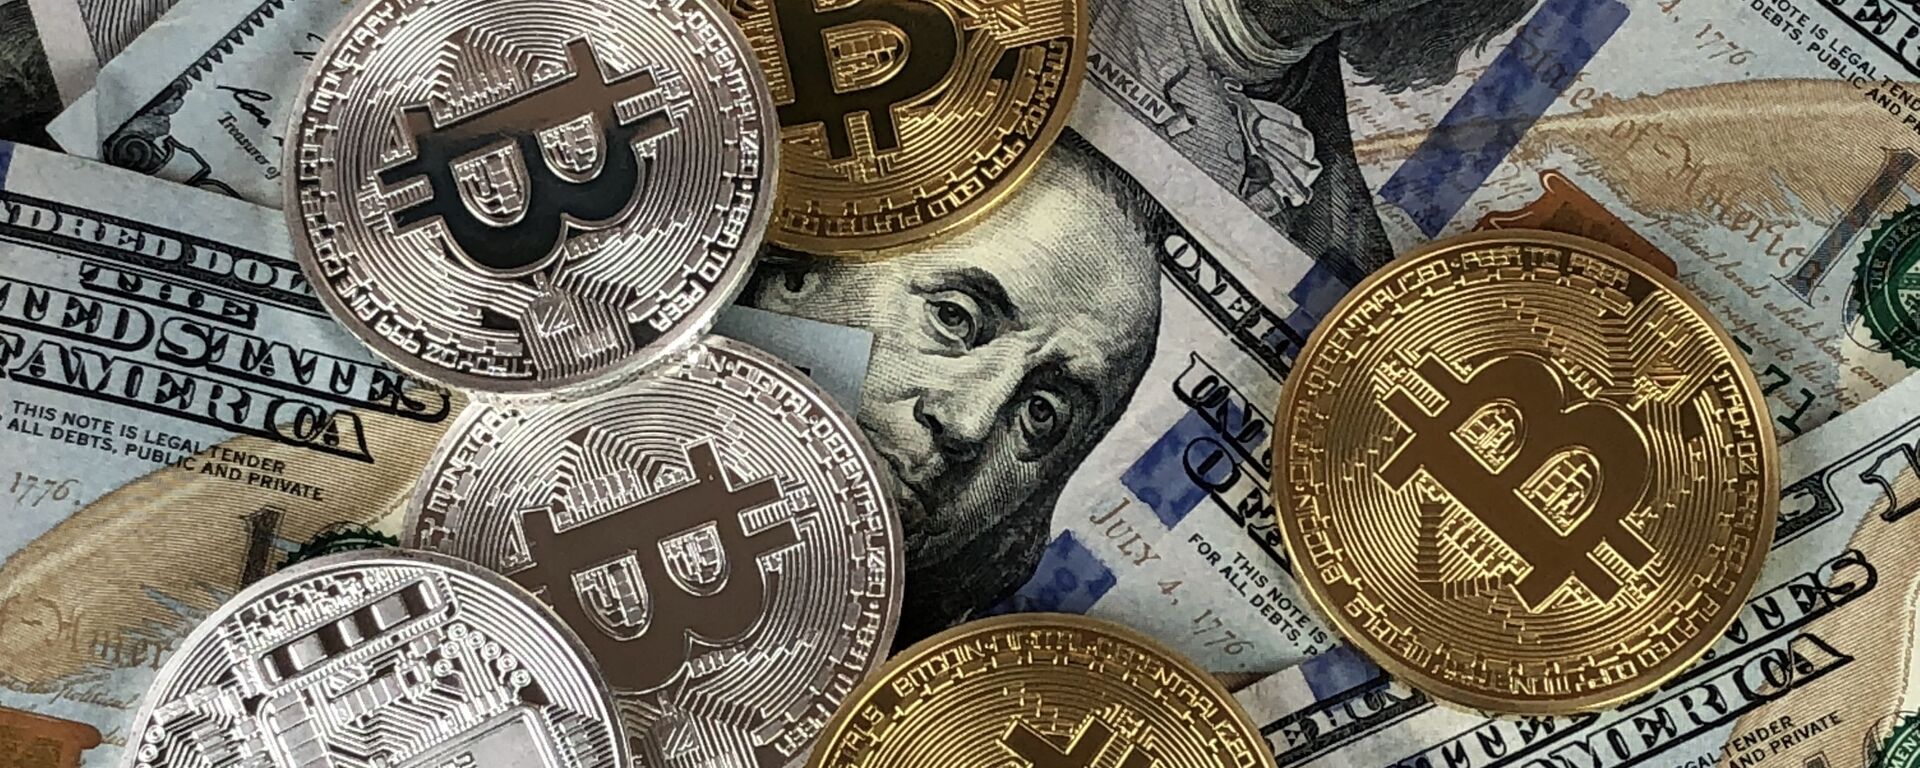 US $100 notes, physical Bitcoin, cryptocurrency - Sputnik International, 1920, 20.12.2021